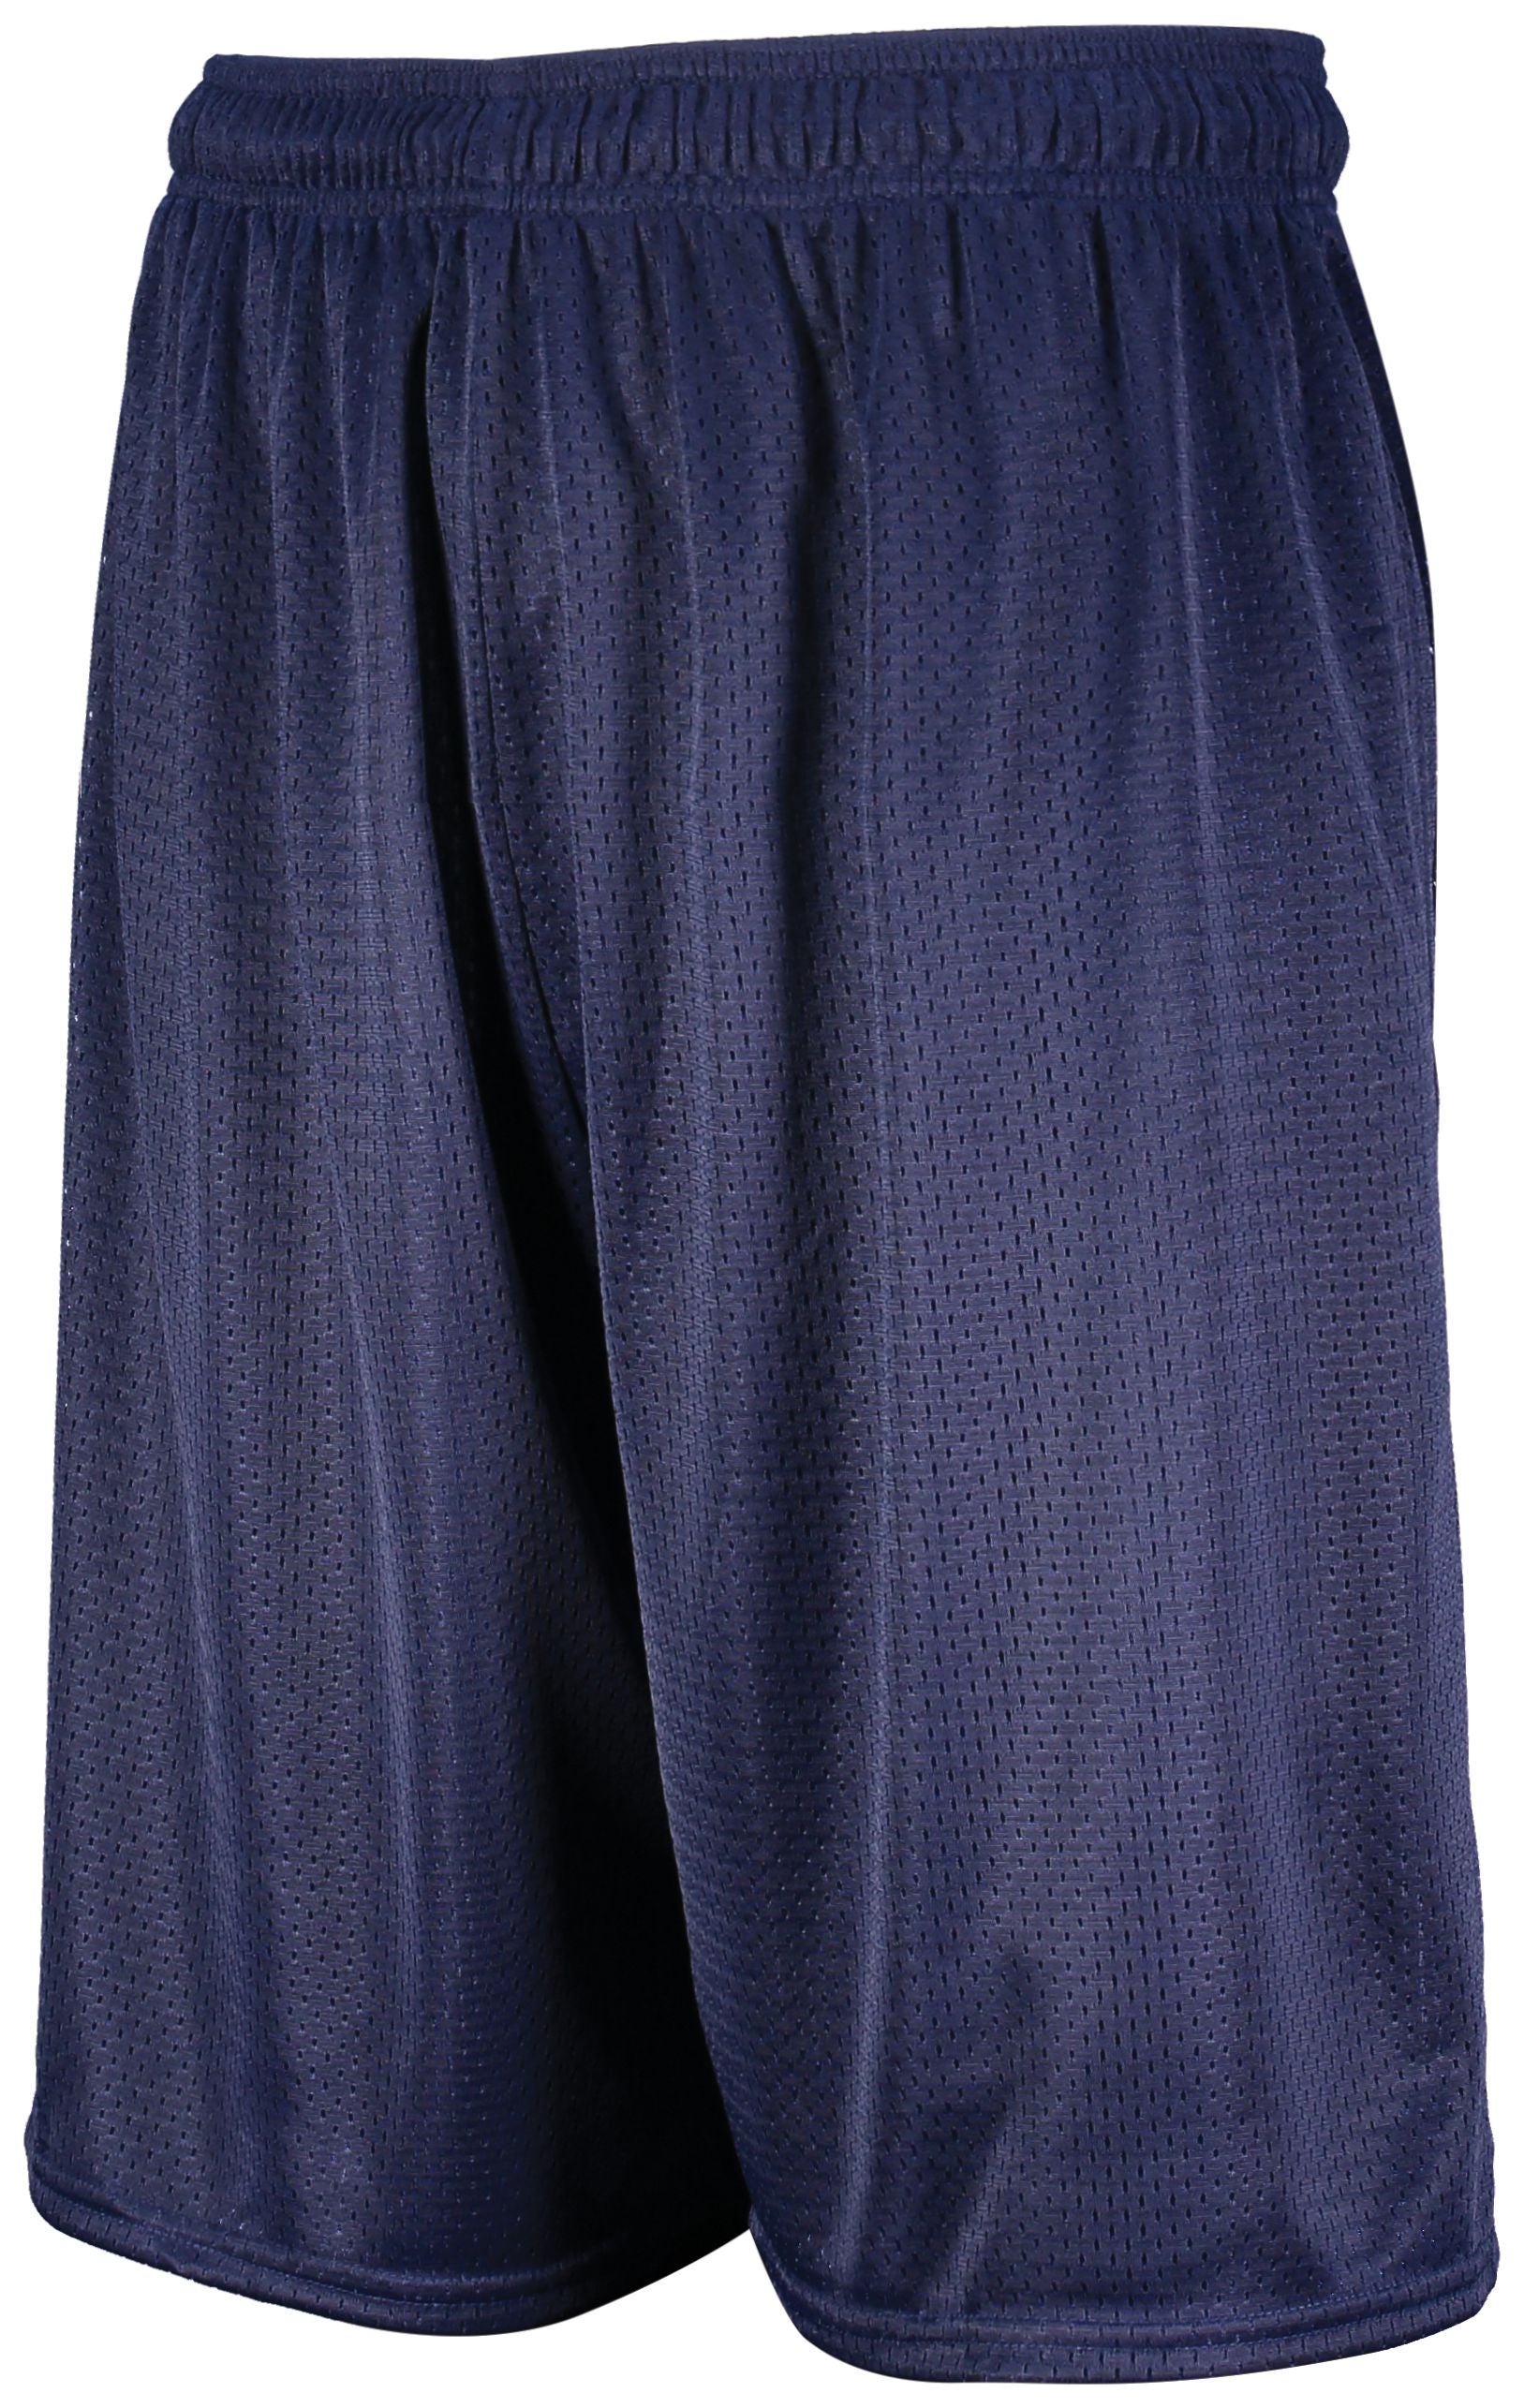 Russell Athletic Dri-Power Mesh Shorts in Navy  -Part of the Adult, Adult-Shorts, Russell-Athletic-Products product lines at KanaleyCreations.com